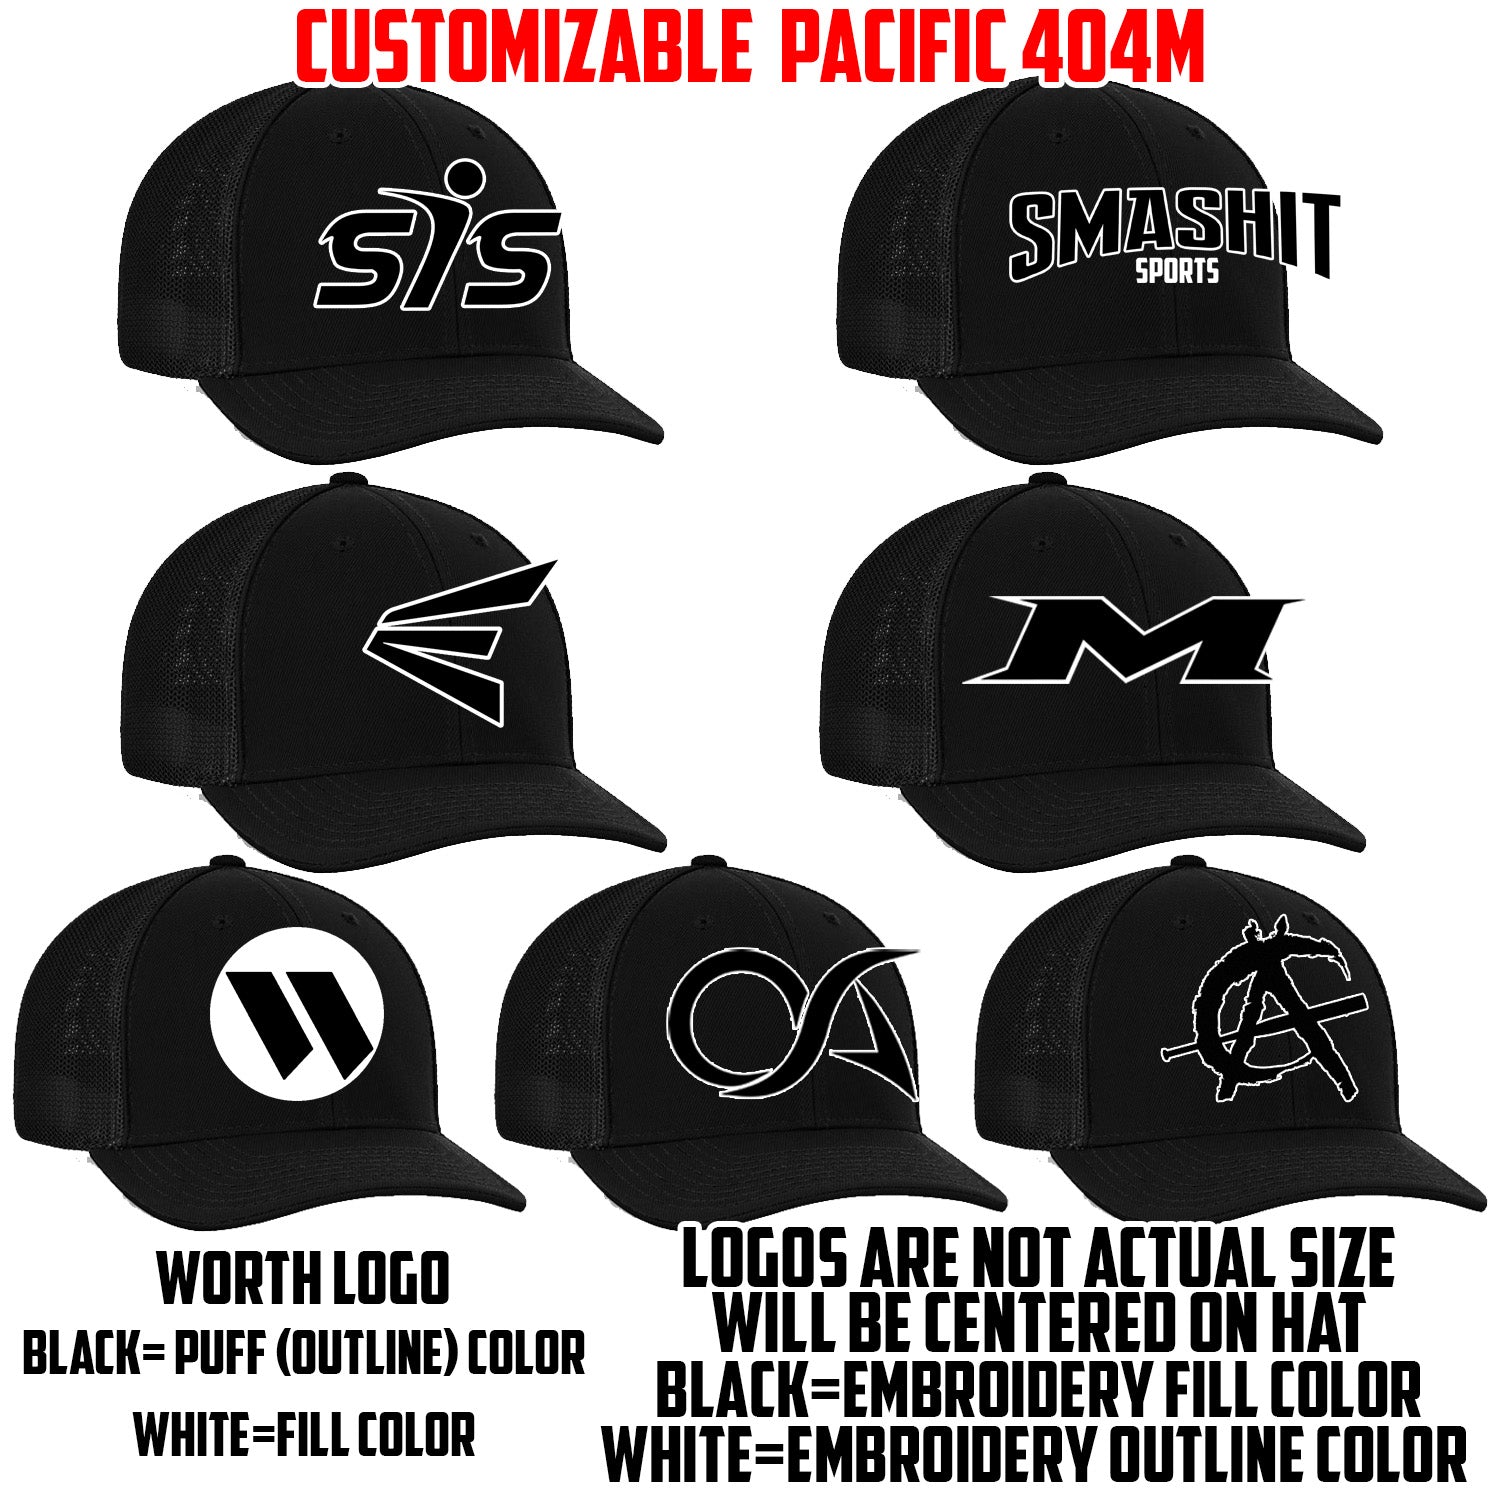 Customizable Logo Hat by Pacific (BLACK 404M)